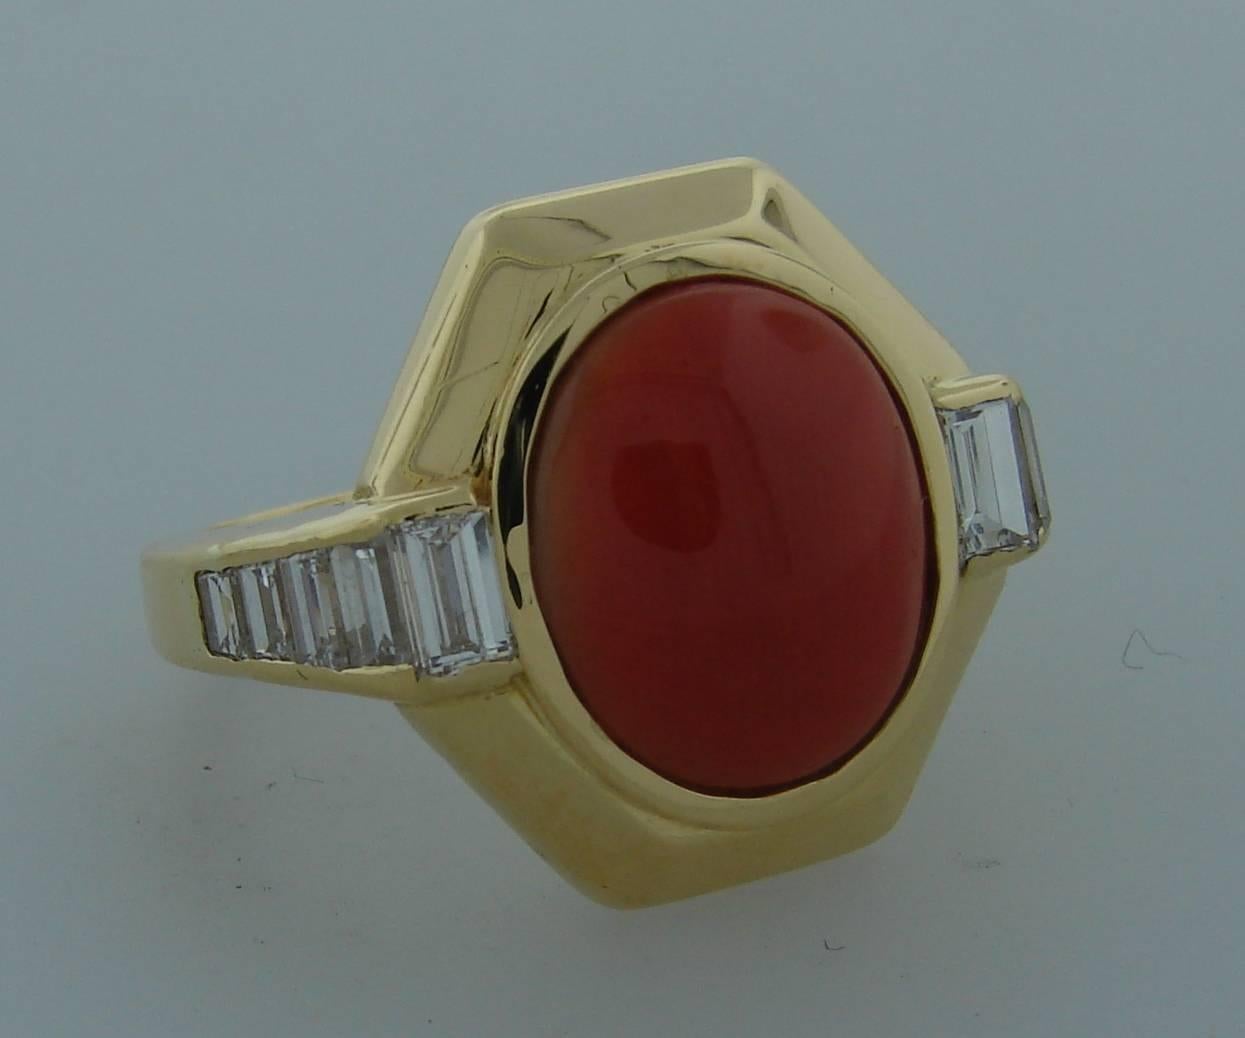 Elegant cocktail ring created by Bulgari in Italy in the 1980's. Features a beautiful oval Mediterranean coral framed in 18k yellow gold setting and accented with diamonds. The diamonds are baguette and emerald cut, G color, VS1 clarity, total